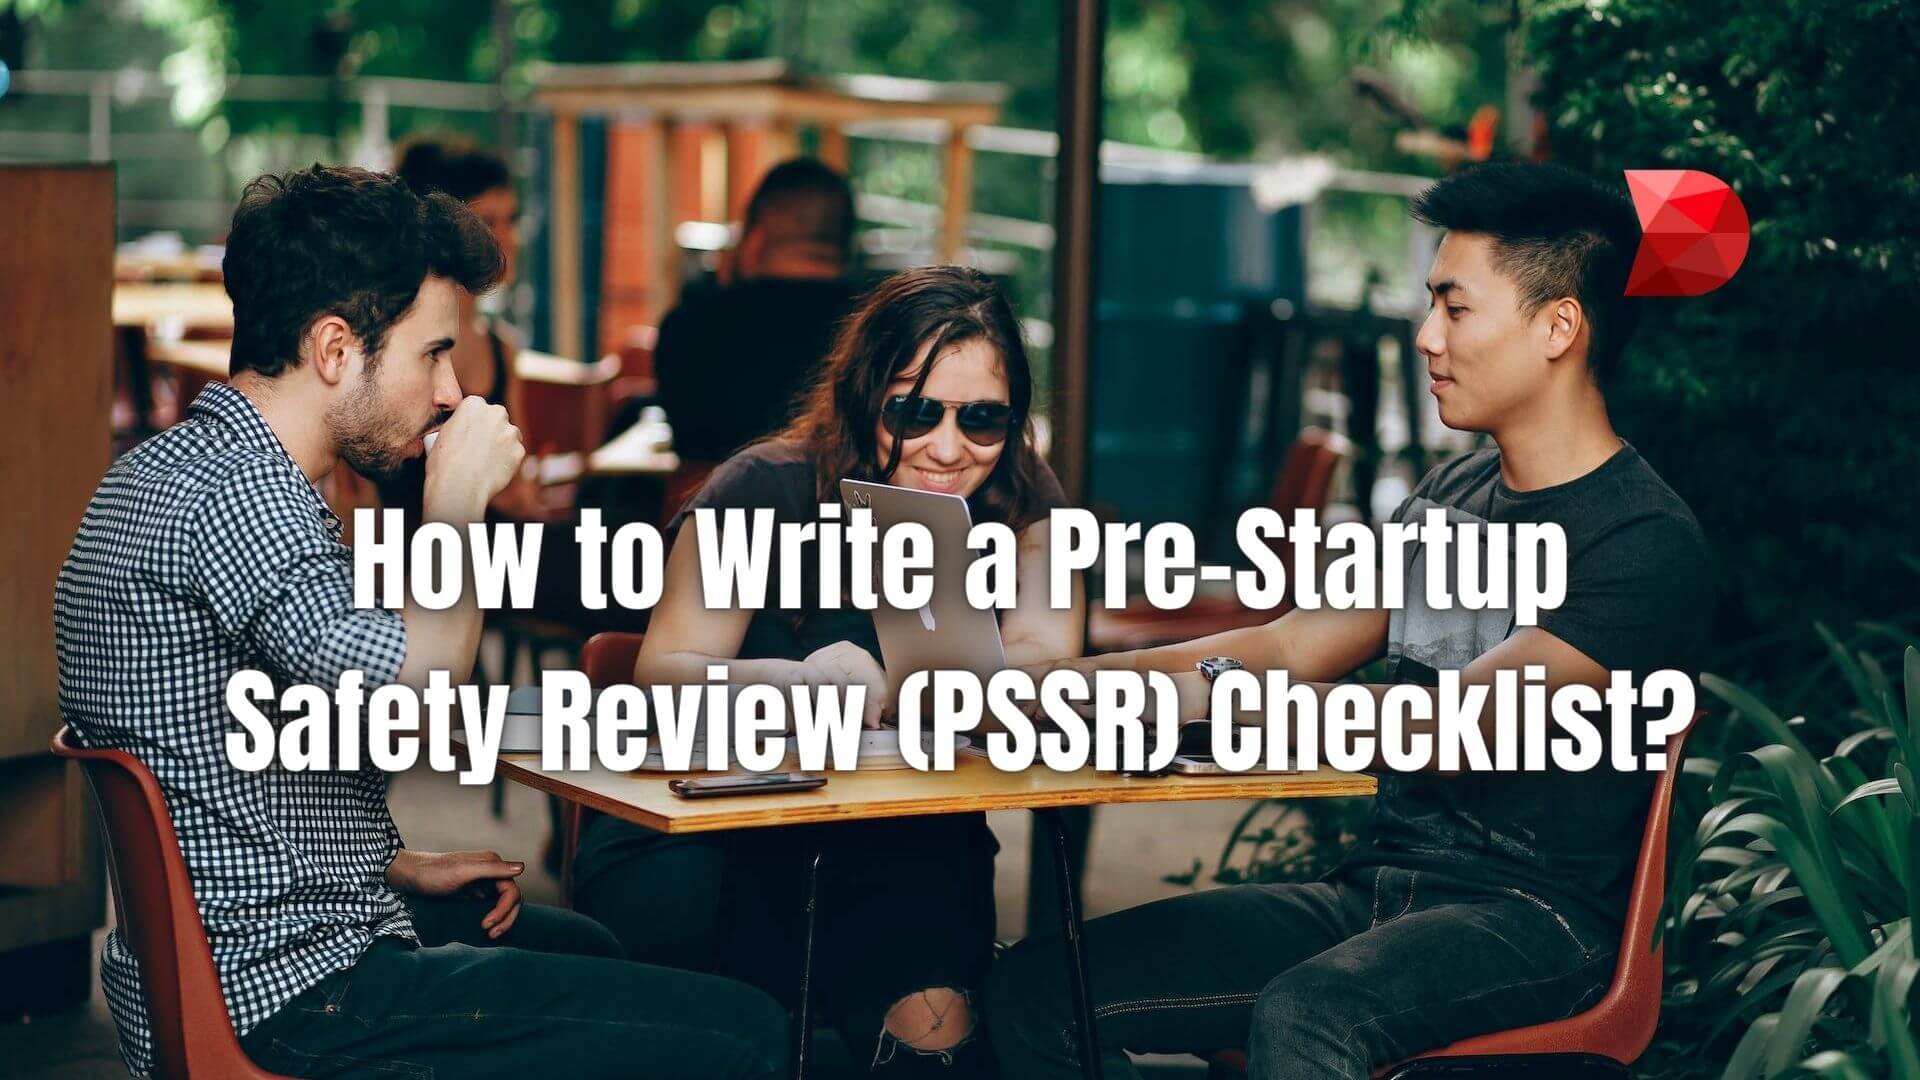 This article will talk about what a PSSR is and how to create a PSSR checklist for your startup business. Read here to learn more!